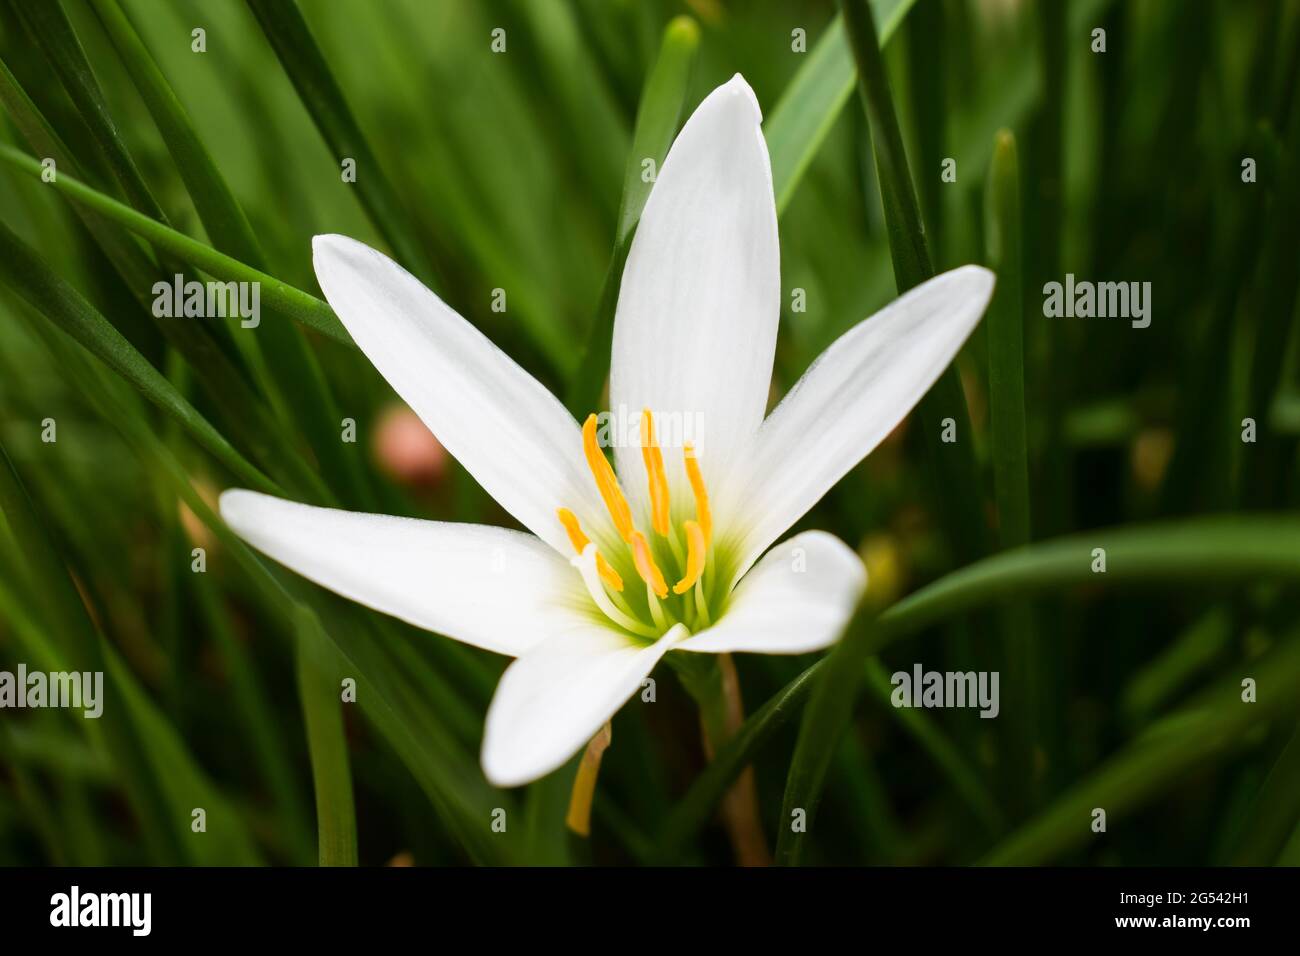 Rain lily flower in white color also known as Zephyranthes carinata. Indian flowering plants Stock Photo